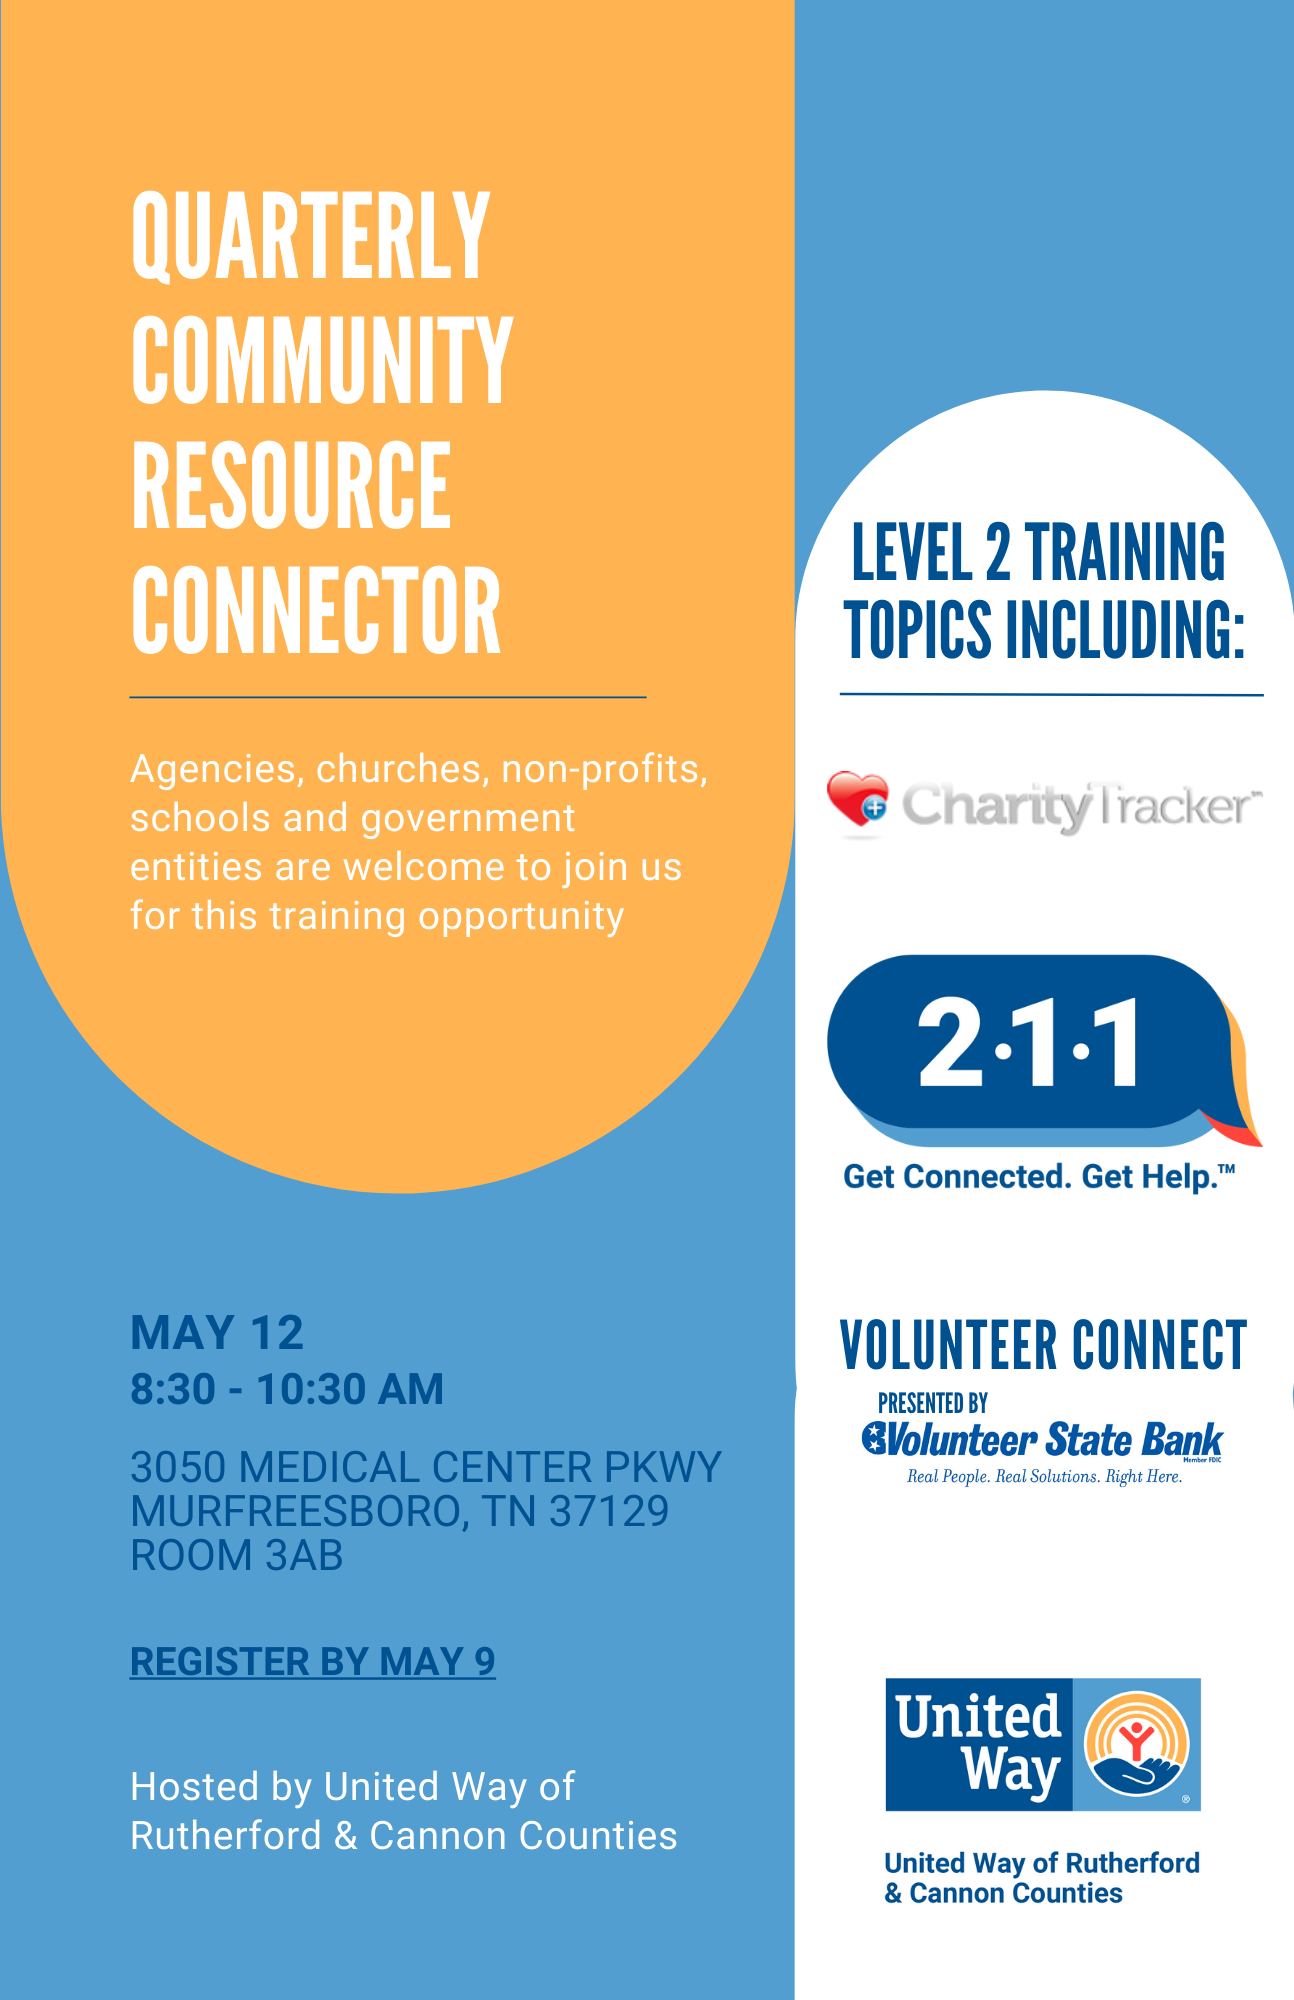 Quarterly Community Resource Connector